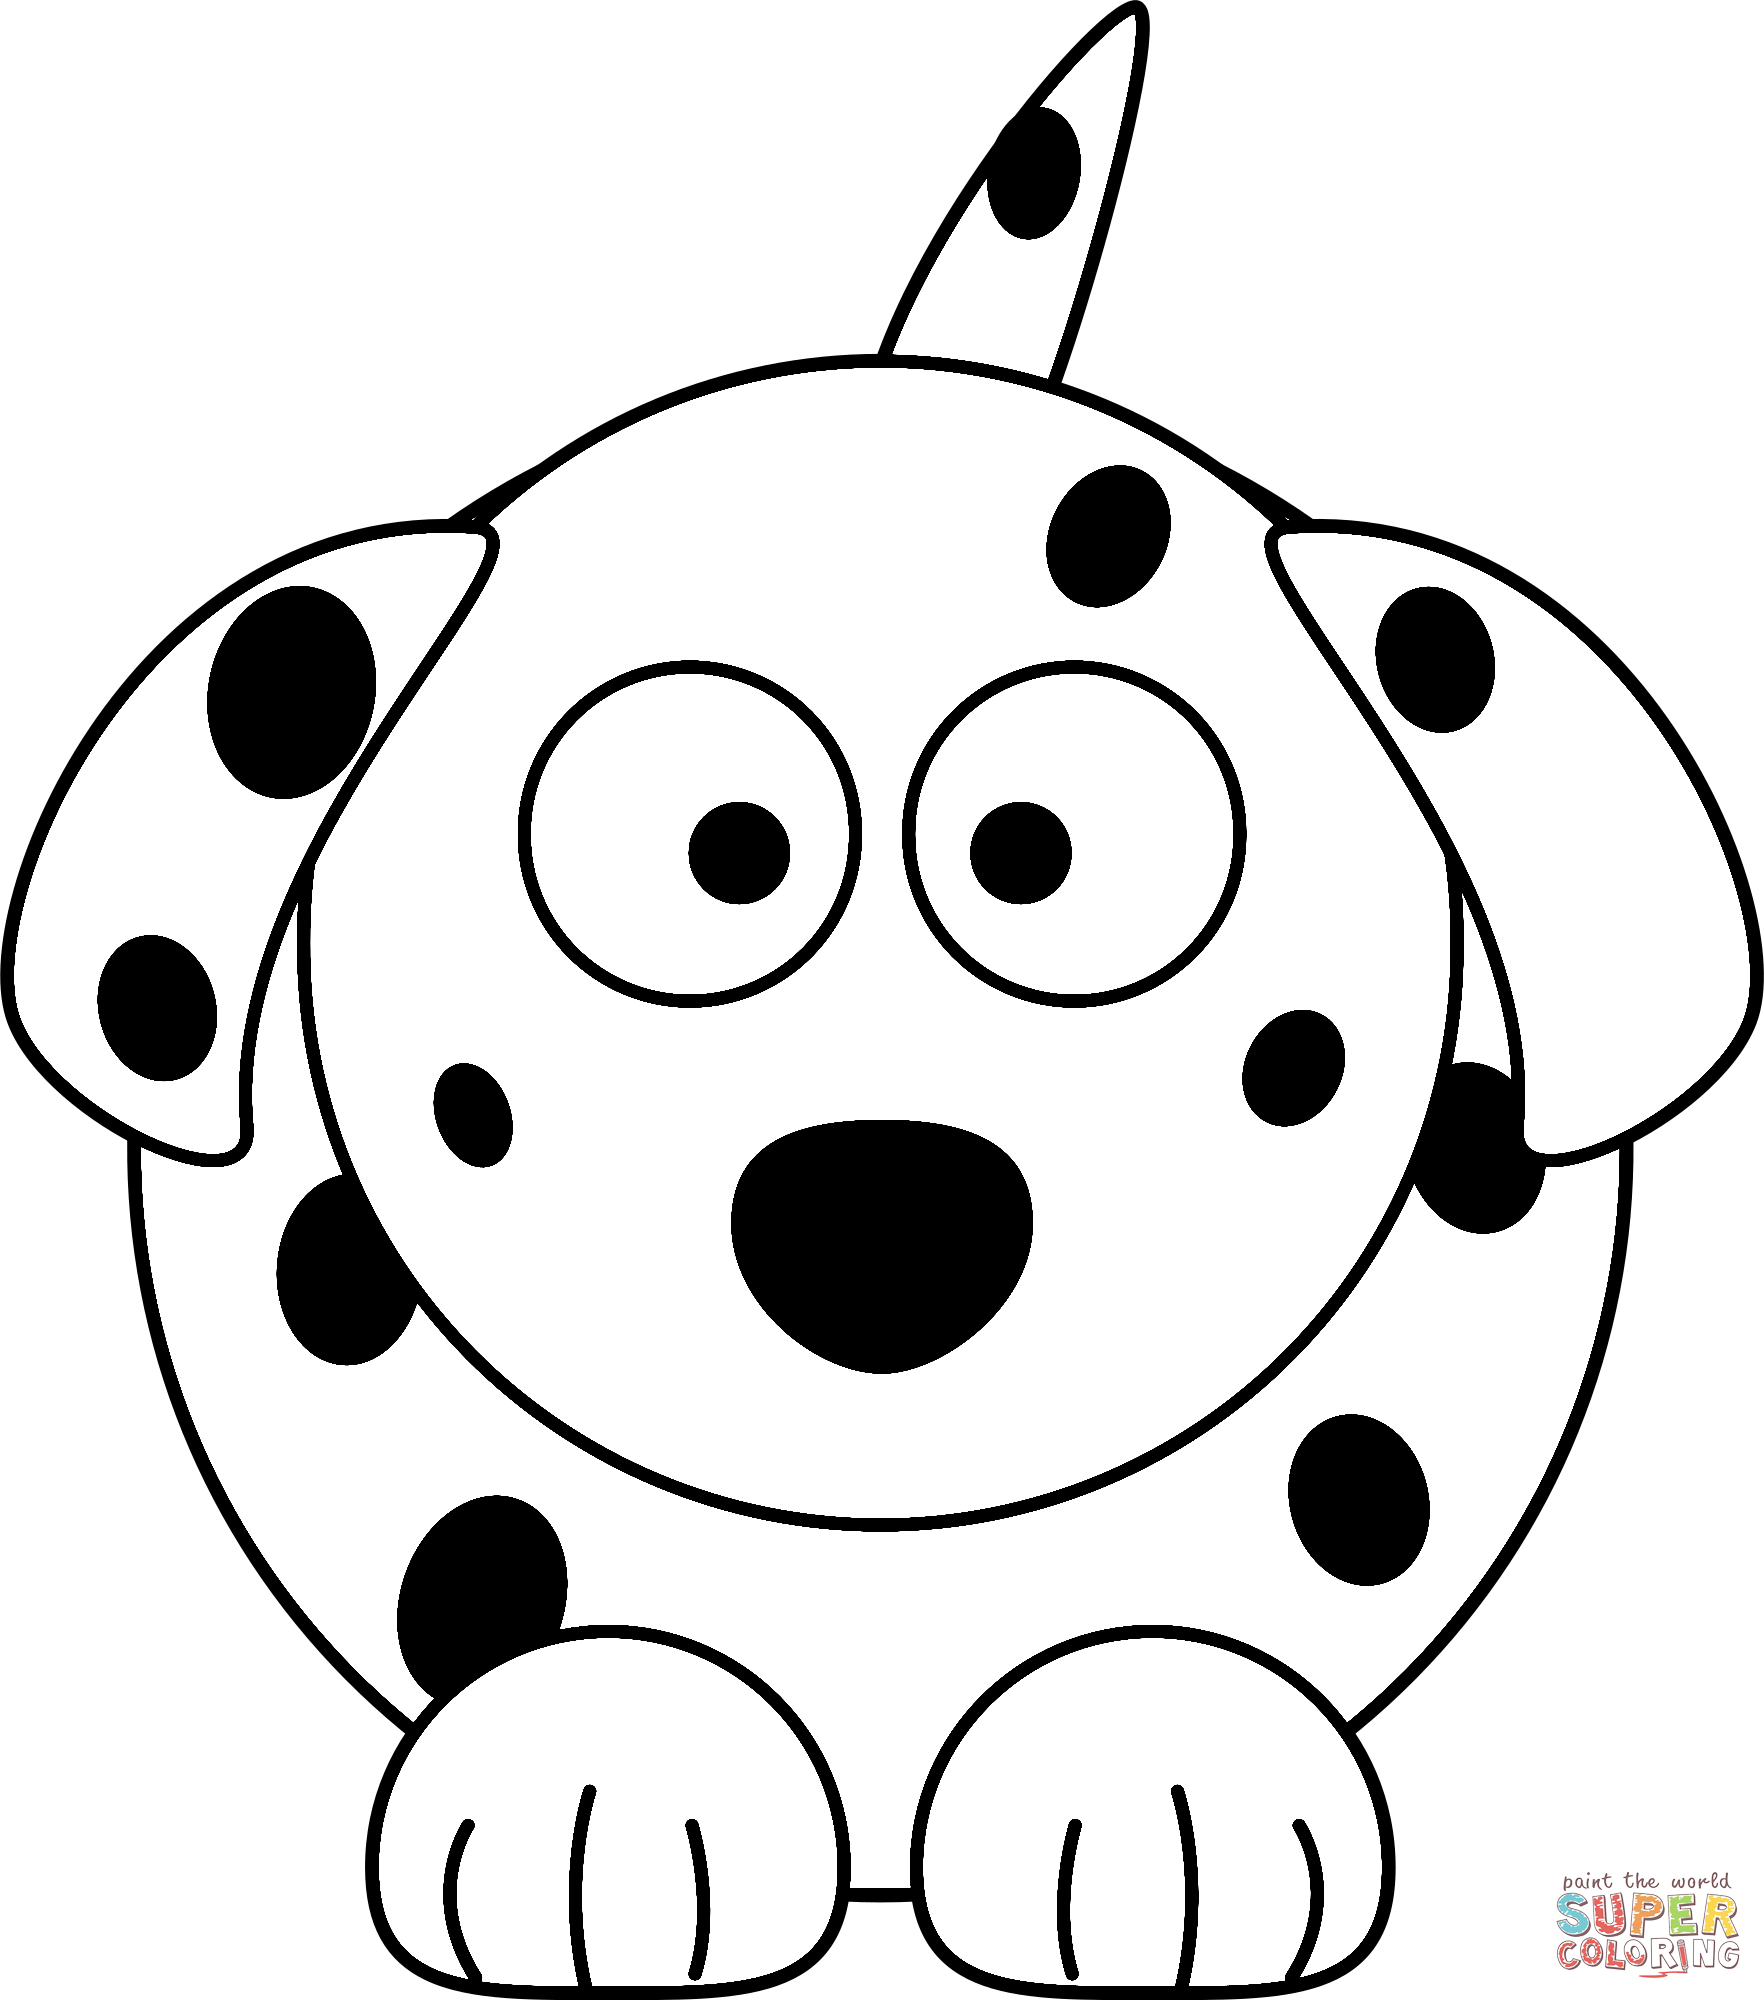 Dalmatian cartoon dog coloring page free printable coloring pages